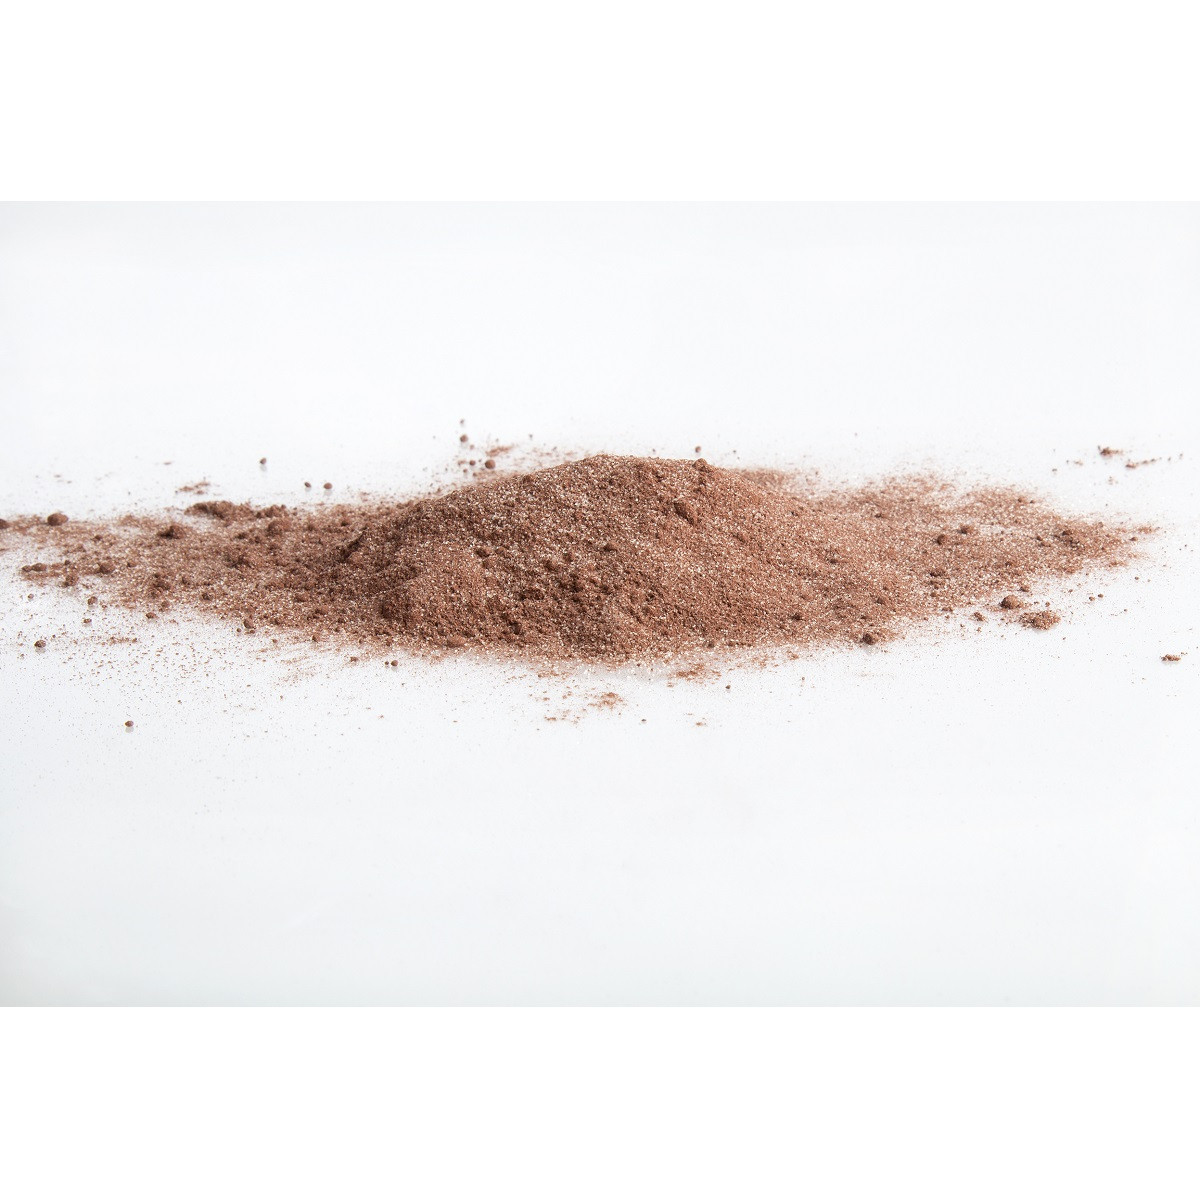 Irca Bavaroise/Mousse Mix Pure Chocolade (Lilly)1kg